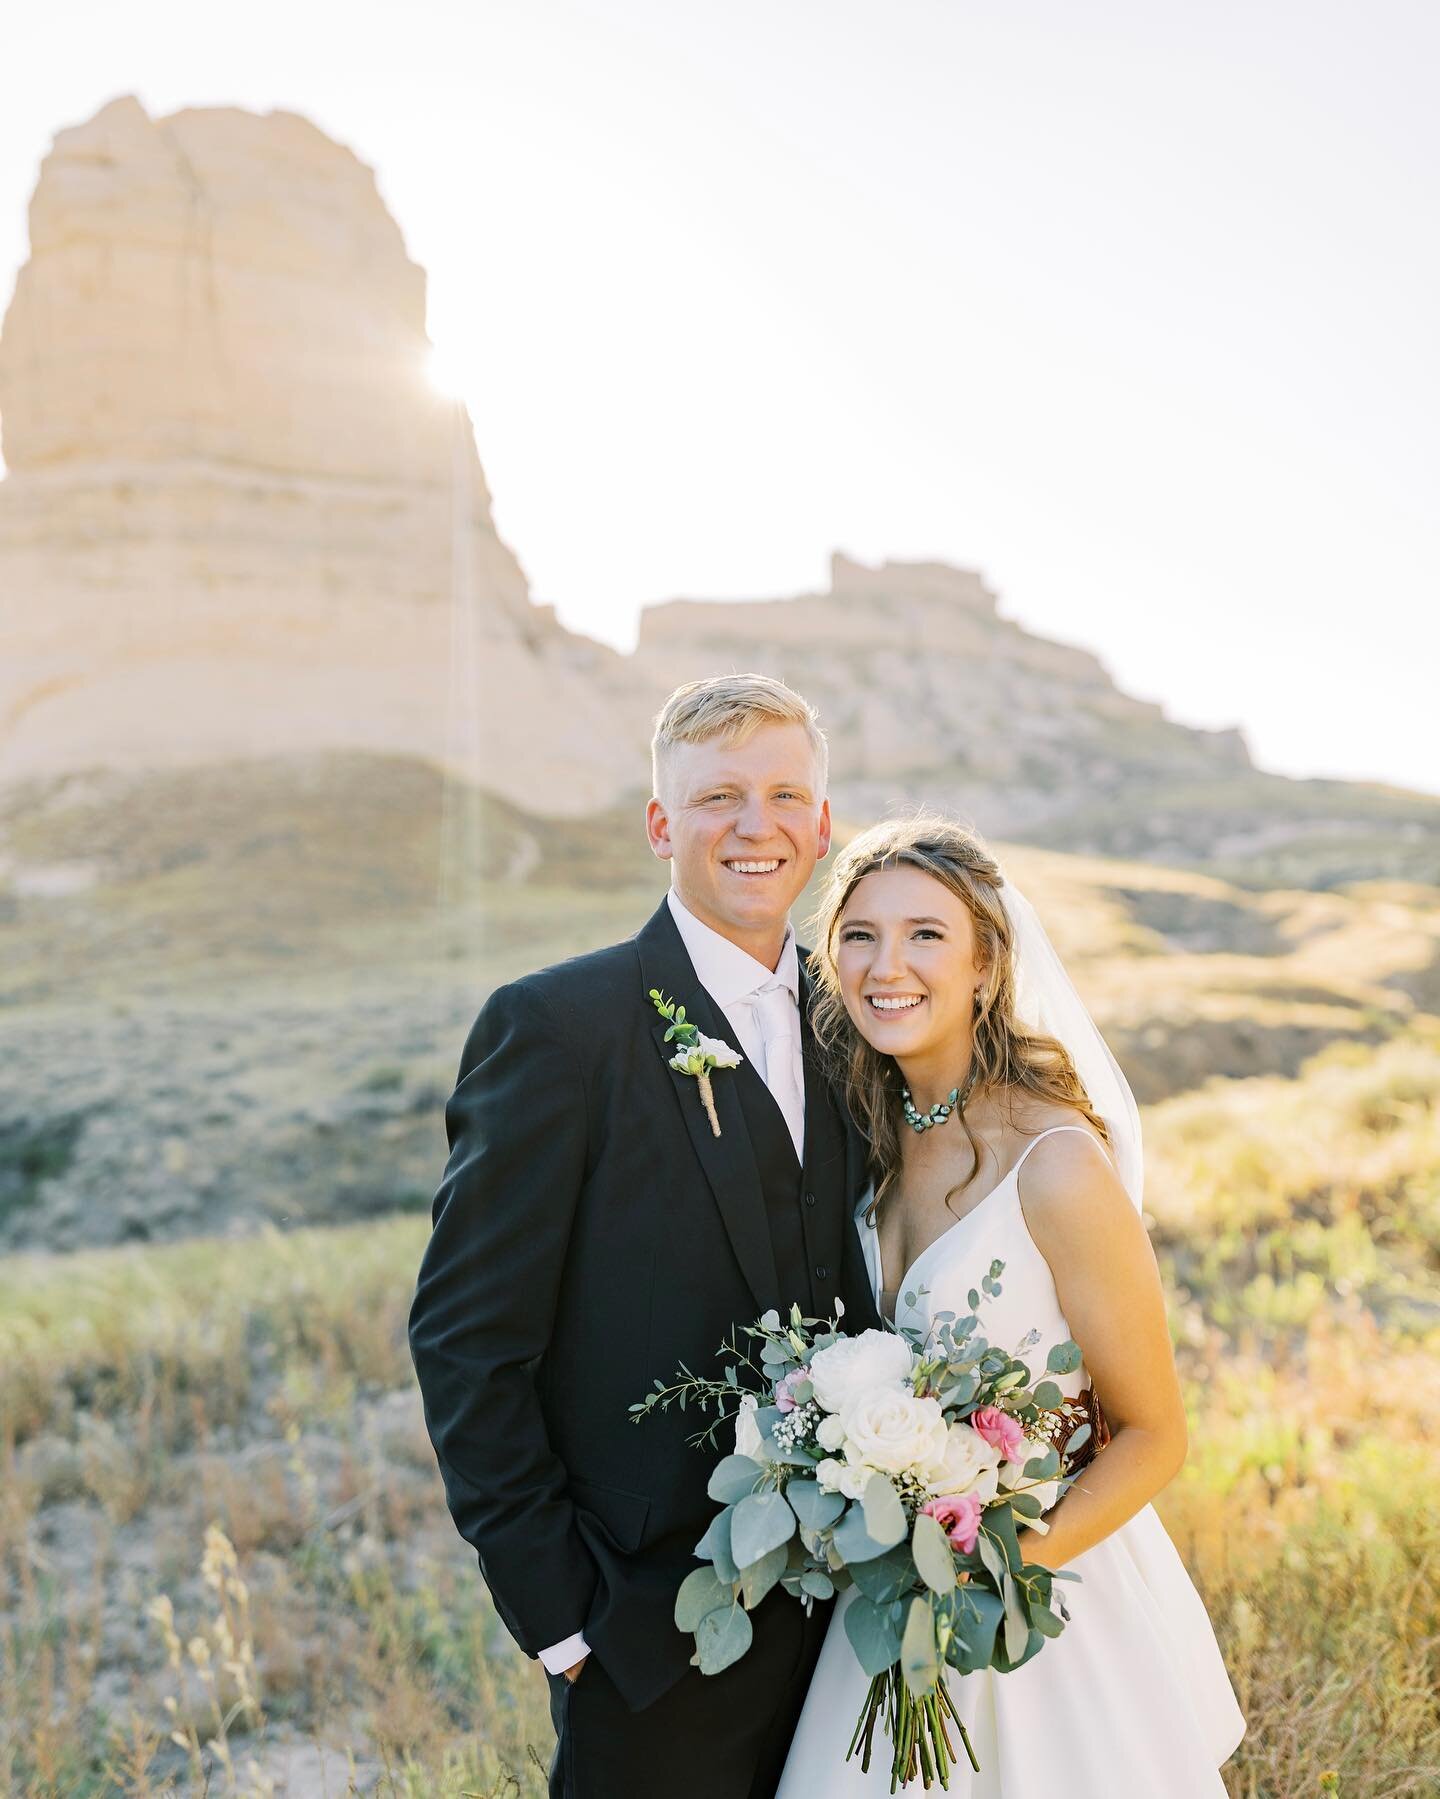 David and Christy are married!!! 🎉 featuring iconic Nebraska rocks